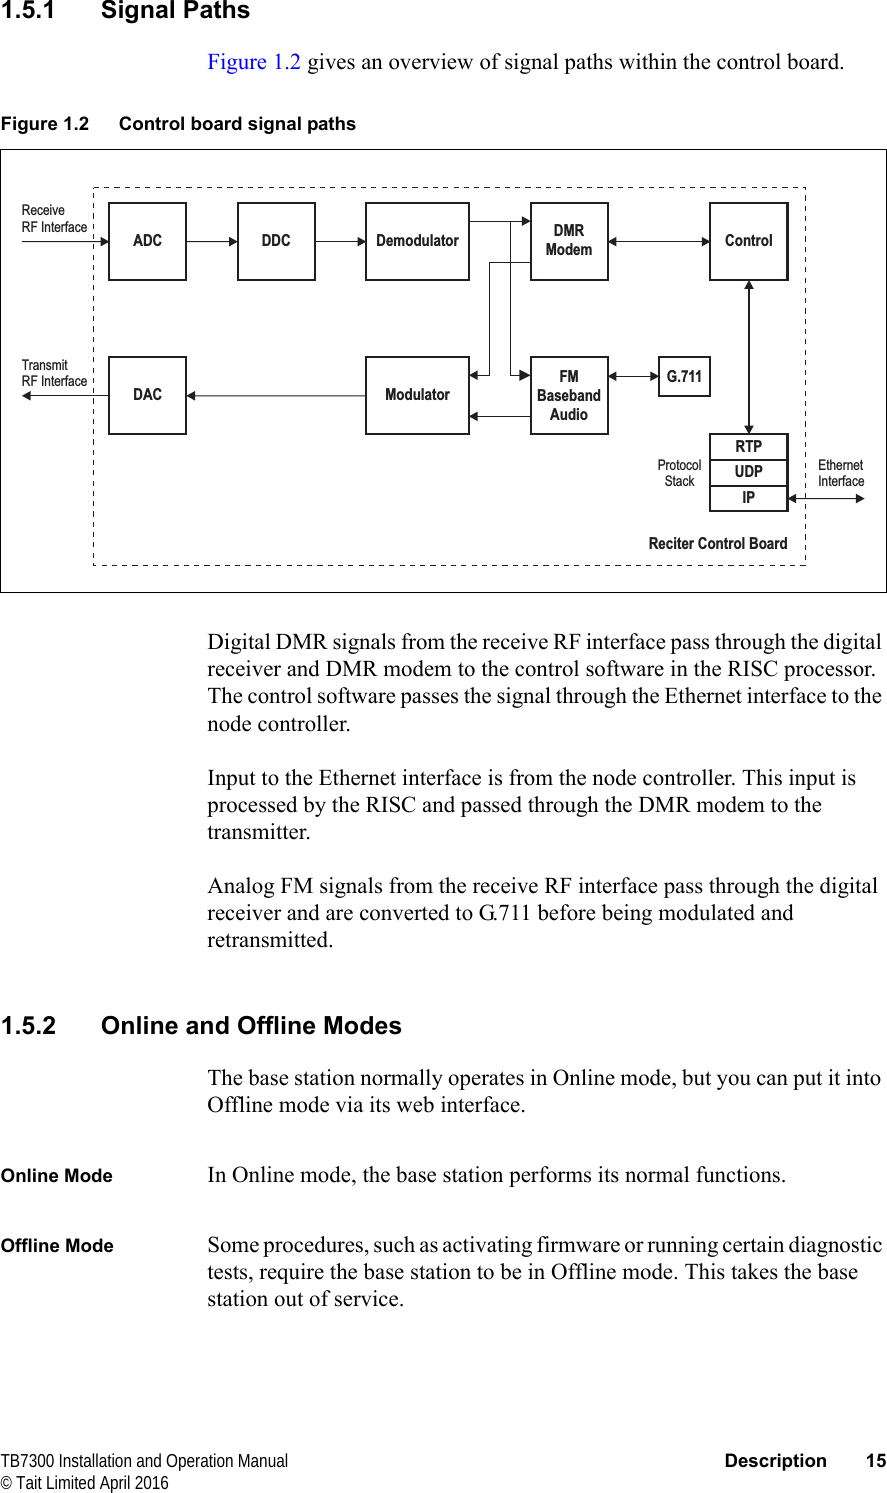  TB7300 Installation and Operation Manual Description 15© Tait Limited April 20161.5.1 Signal PathsFigure 1.2 gives an overview of signal paths within the control board. Digital DMR signals from the receive RF interface pass through the digital receiver and DMR modem to the control software in the RISC processor. The control software passes the signal through the Ethernet interface to the node controller.Input to the Ethernet interface is from the node controller. This input is processed by the RISC and passed through the DMR modem to the transmitter.Analog FM signals from the receive RF interface pass through the digital receiver and are converted to G.711 before being modulated and retransmitted.1.5.2 Online and Offline ModesThe base station normally operates in Online mode, but you can put it into Offline mode via its web interface.Online Mode In Online mode, the base station performs its normal functions. Offline Mode Some procedures, such as activating firmware or running certain diagnostic tests, require the base station to be in Offline mode. This takes the base station out of service. Figure 1.2 Control board signal pathsModulatorDemodulator DMRModemFMBasebandAudioG.711ControlADC DDCDACRTPUDPIPTransmitRF InterfaceReceiveRF InterfaceEthernetInterfaceProtocolStackReciter Control Board